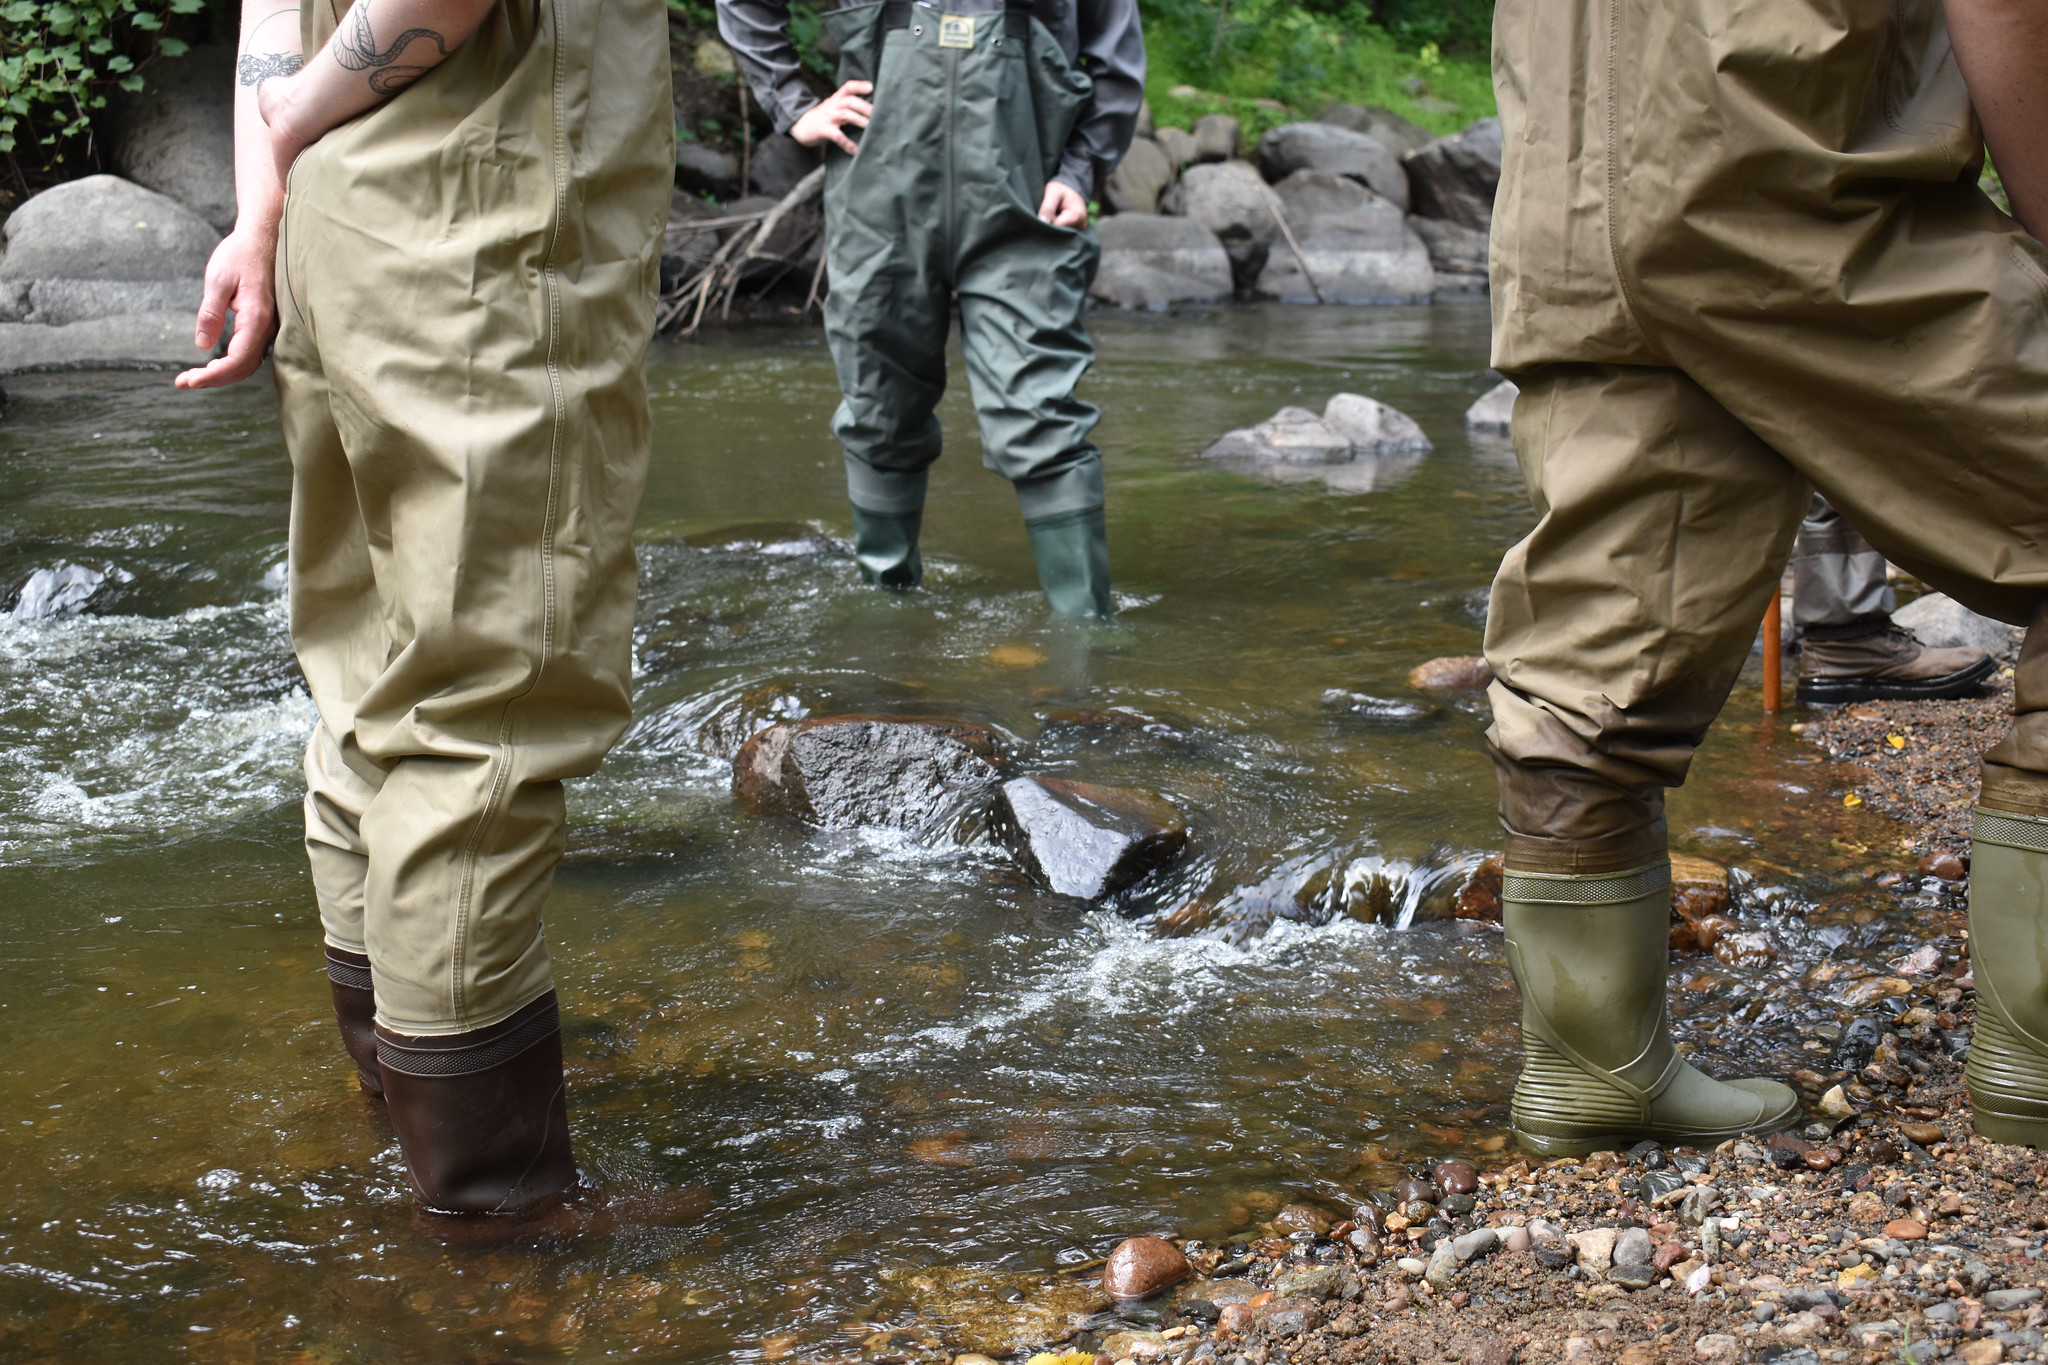 Three people wearing waders stand in ankle-deep water.